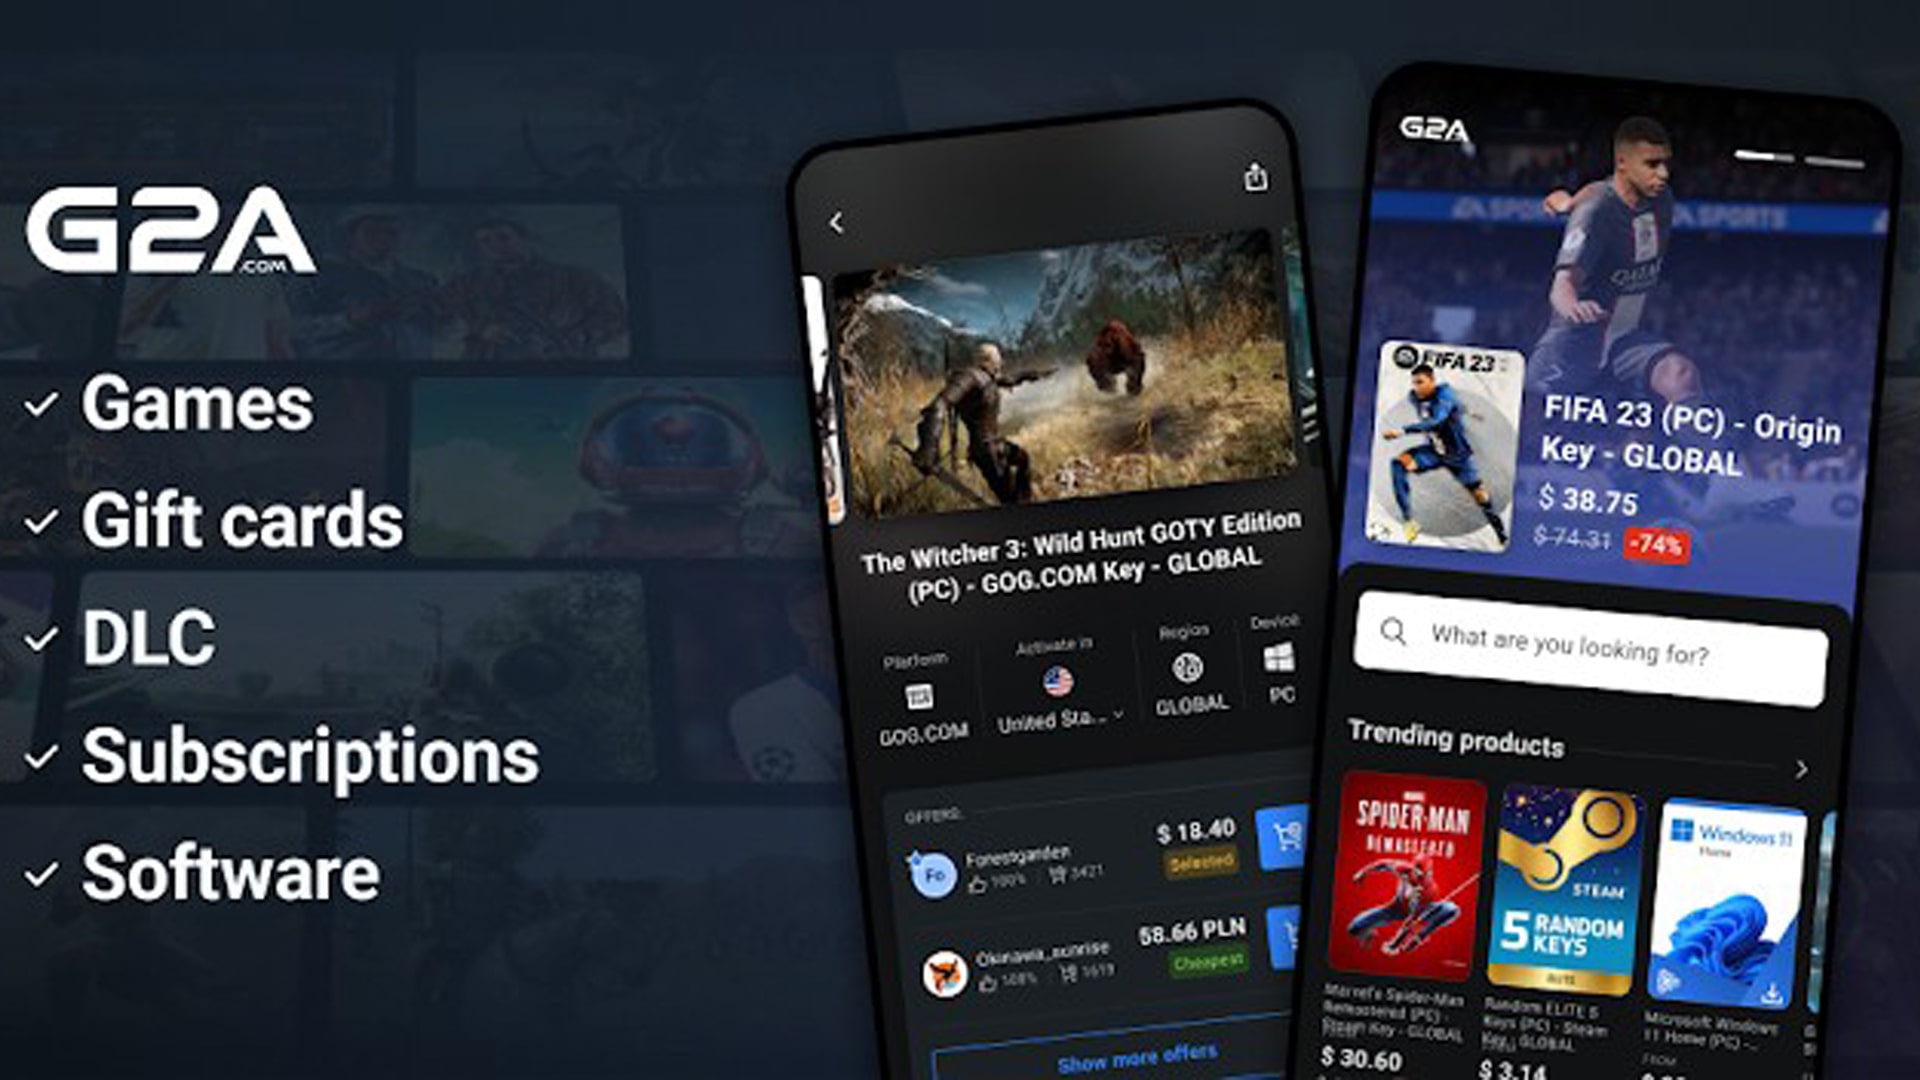 G2A App Interface Displayed on a Smartphone